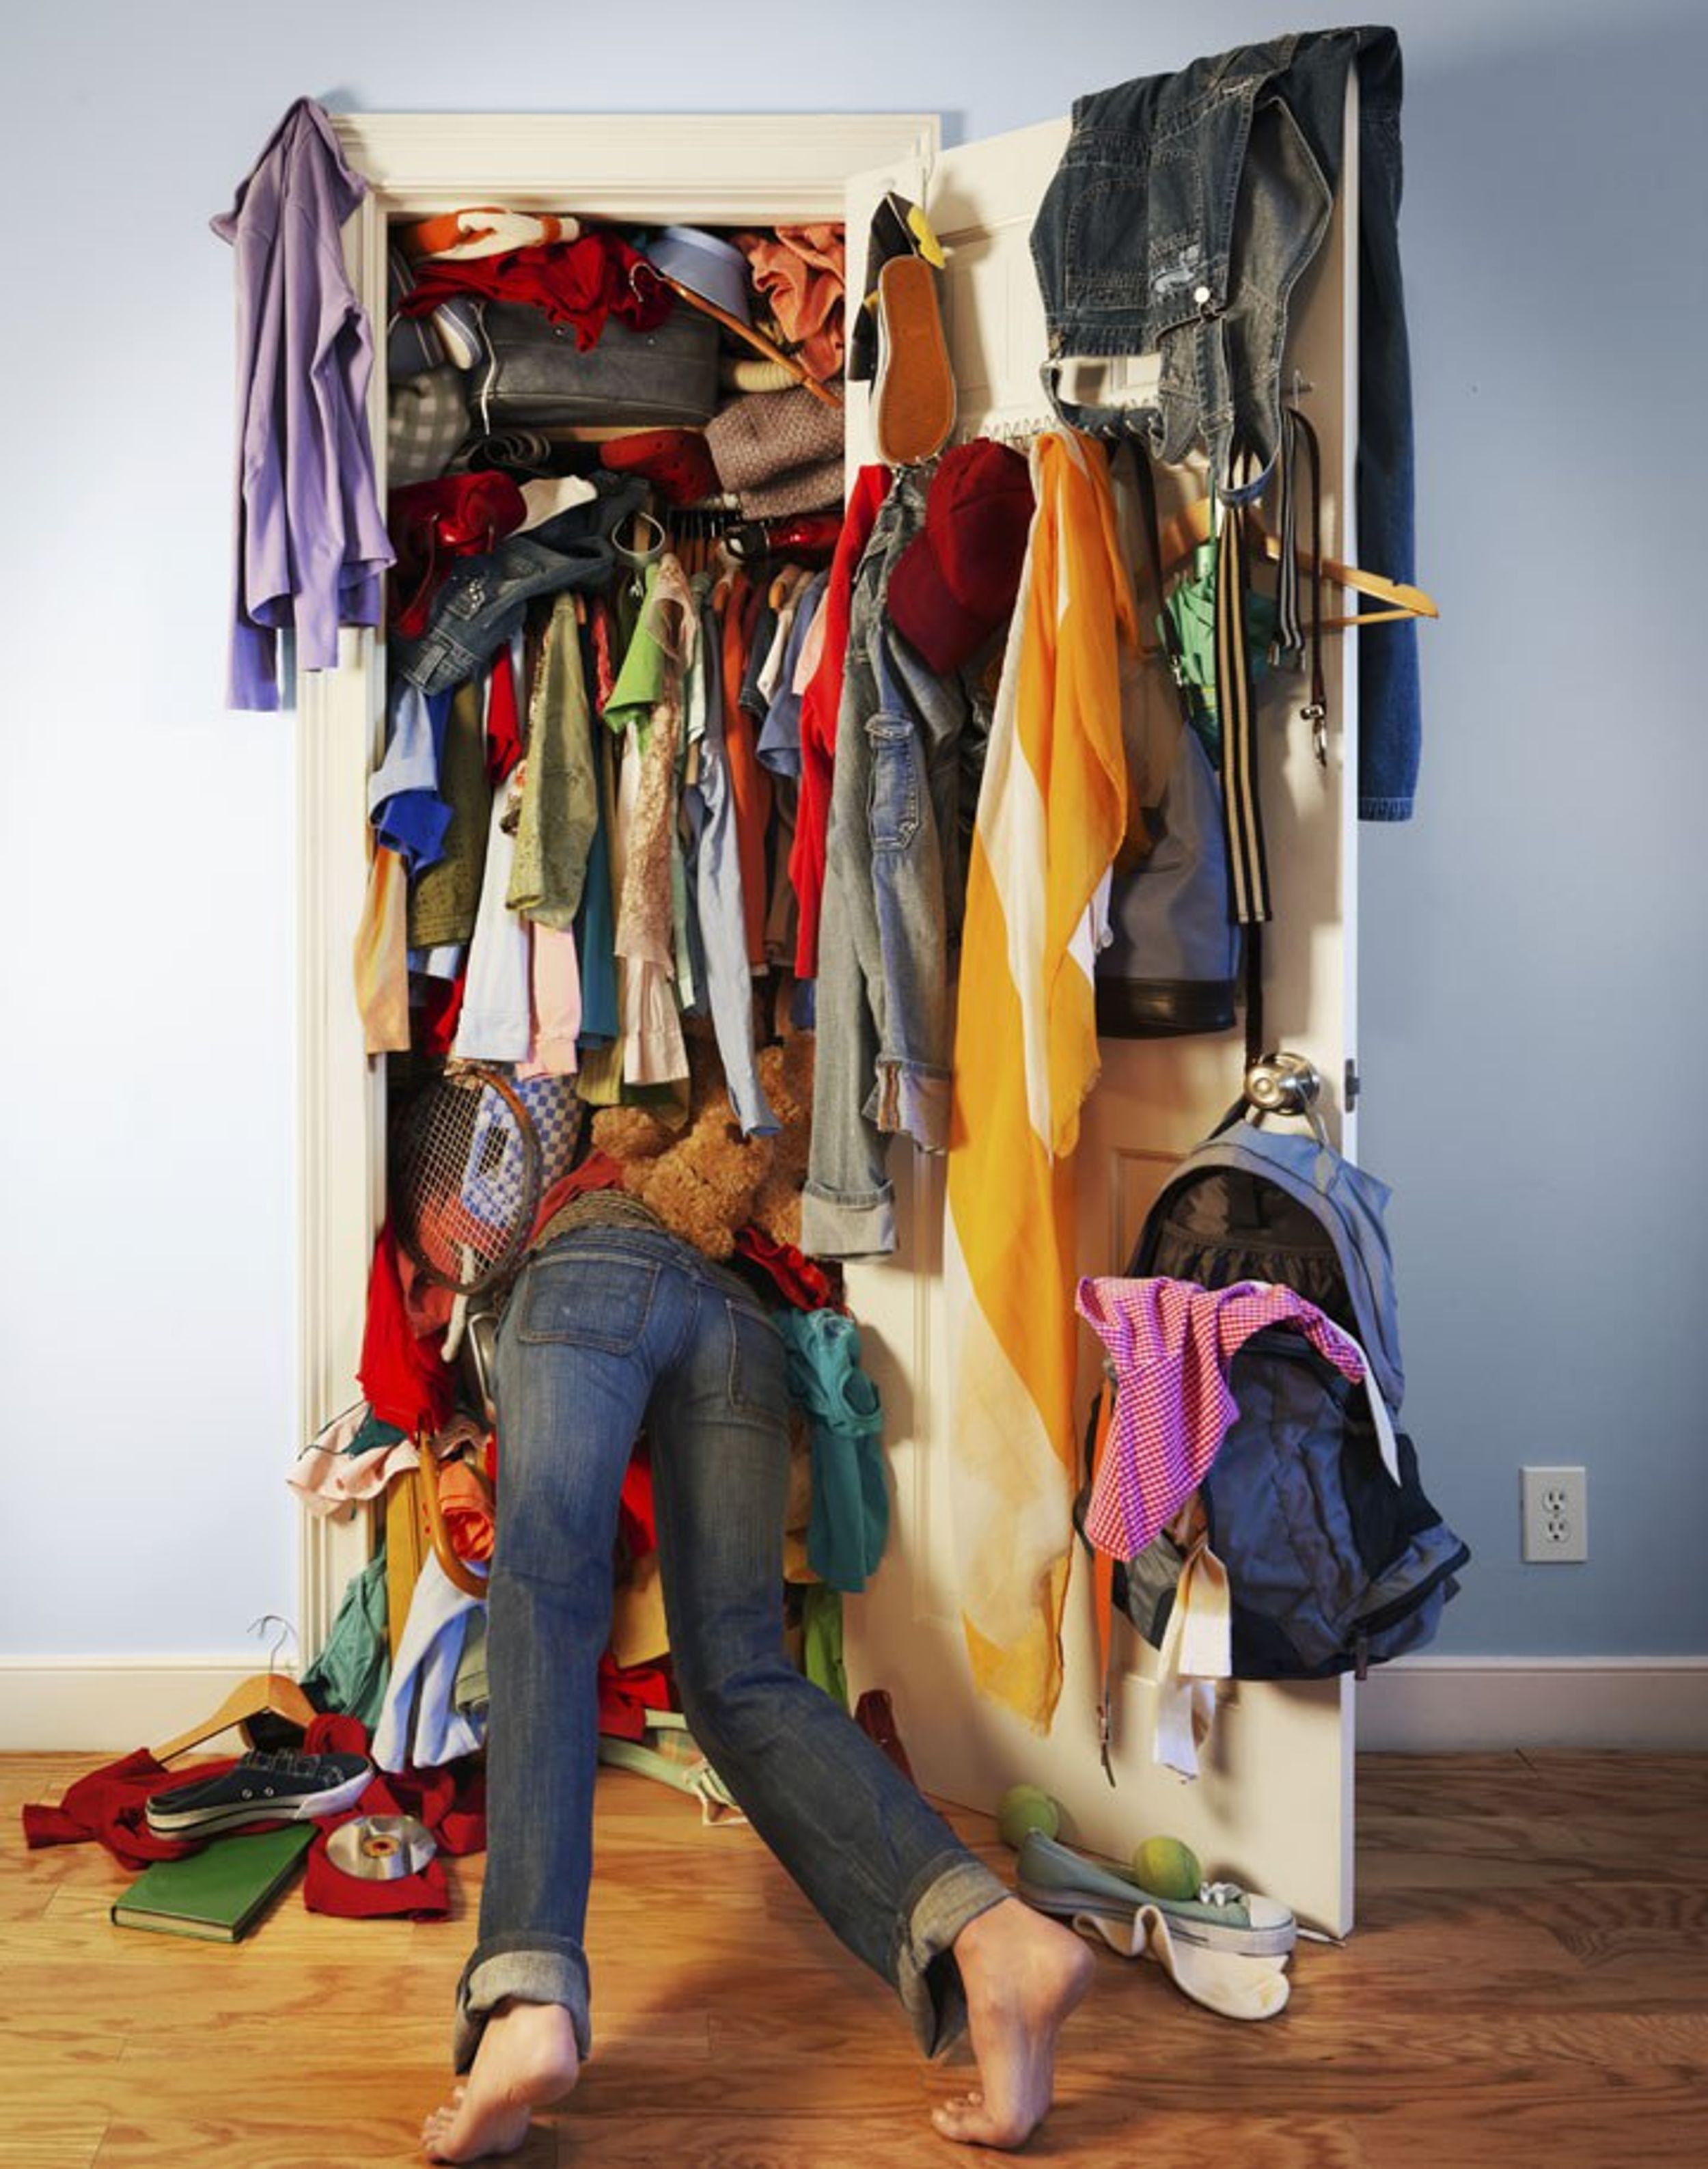 Cleaning Out Your Metaphorical Closet